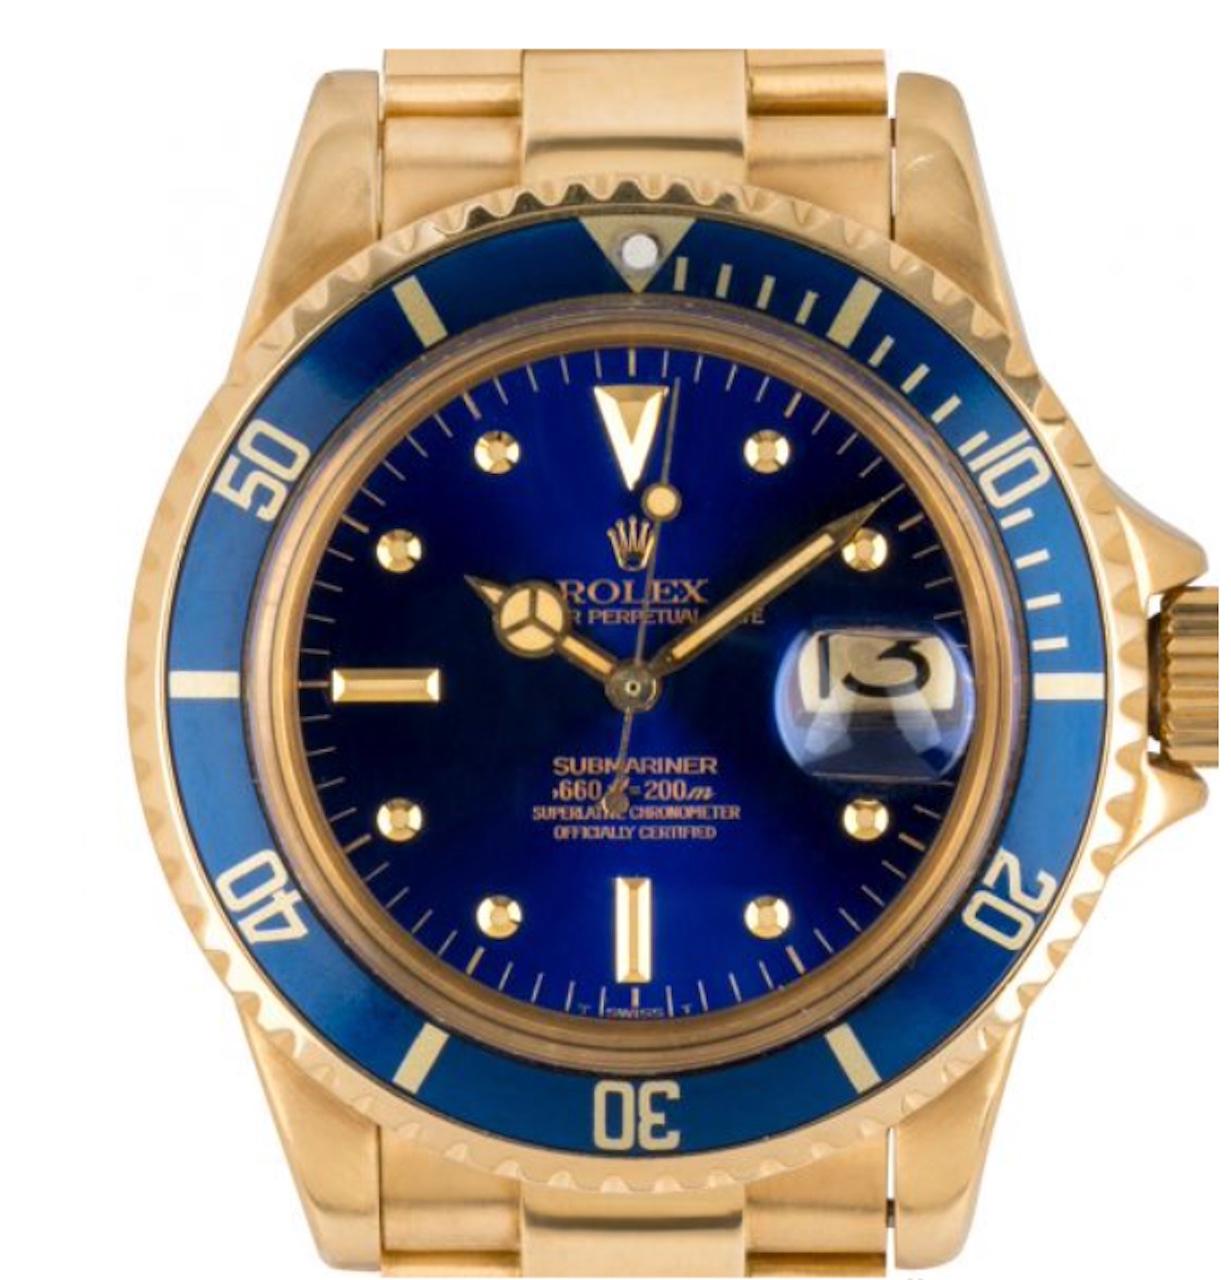 A vintage yellow gold Submariner Date. Featuring a rare distinctive blue dial coined the nipple dial, due to the protruding hour markers made of precious metals in this case yellow gold. For example, the round applied hour markers are filled with